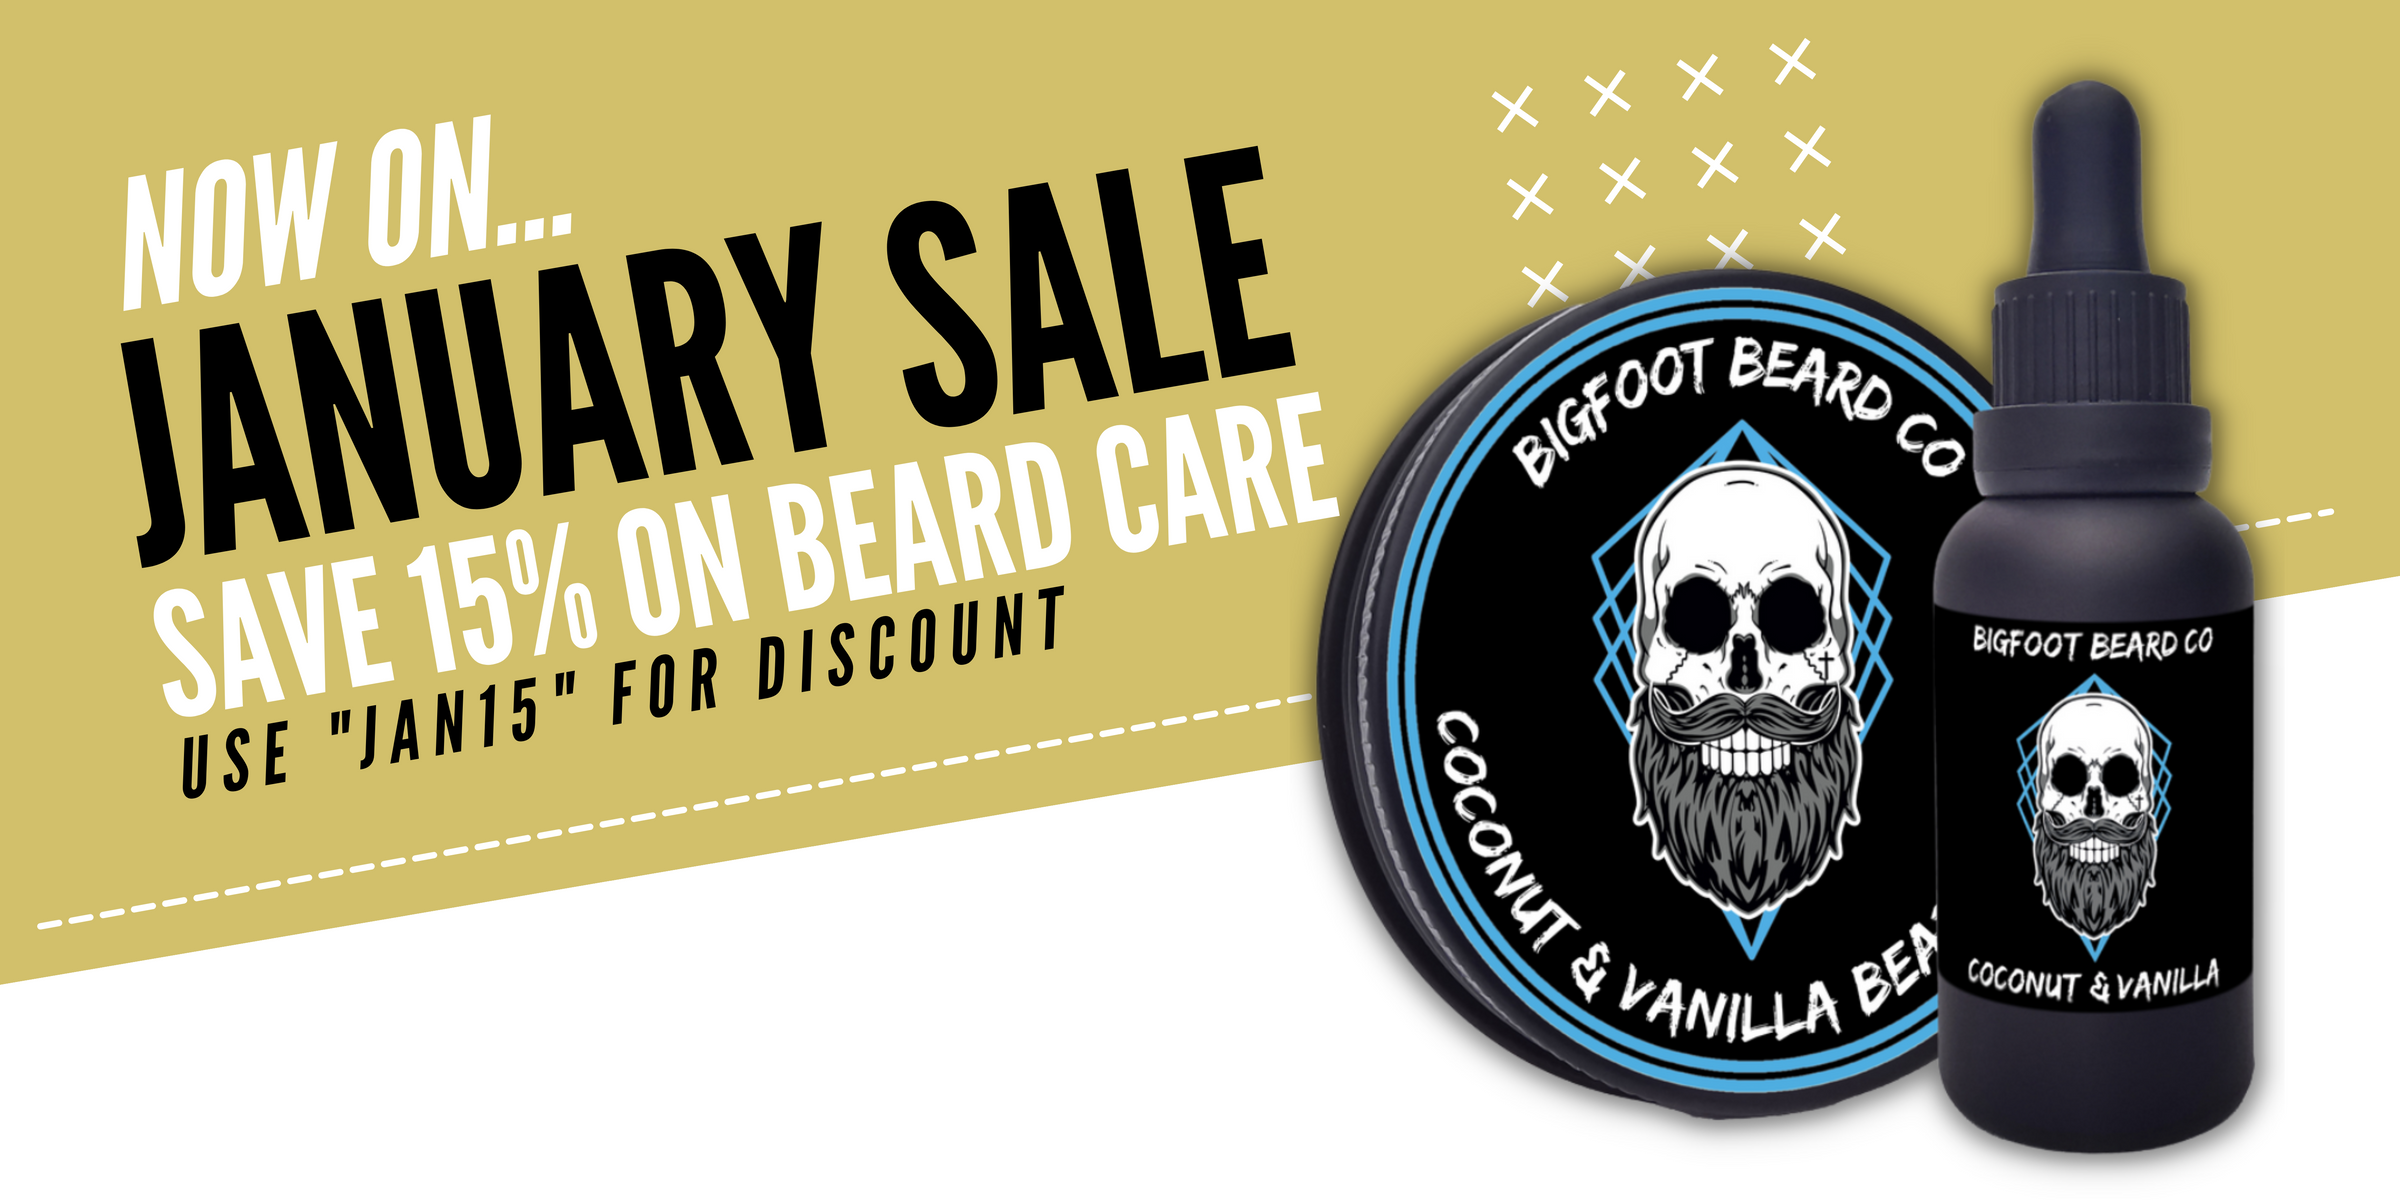 Bigfoot Trading Co. - Kamloops - Father's Day is coming and we have some  great gifts for dads. Our Happy Sasquatch beard products and Smelly Moose  soaps (Dad's like soaps too!) make